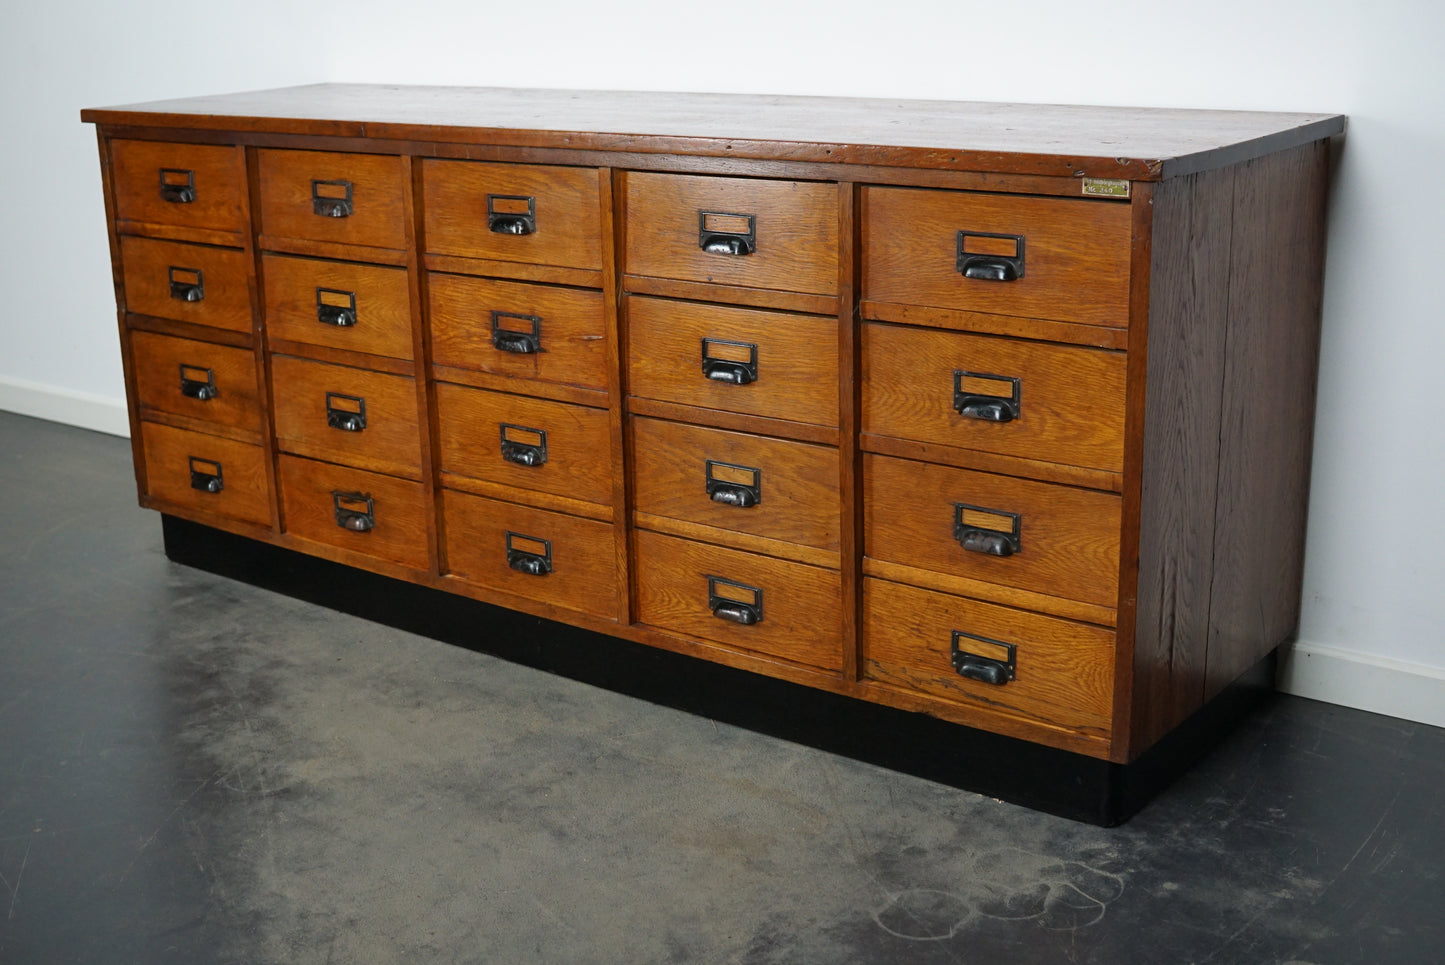 German Industrial Oak Apothecary Cabinet, Mid-20th Century